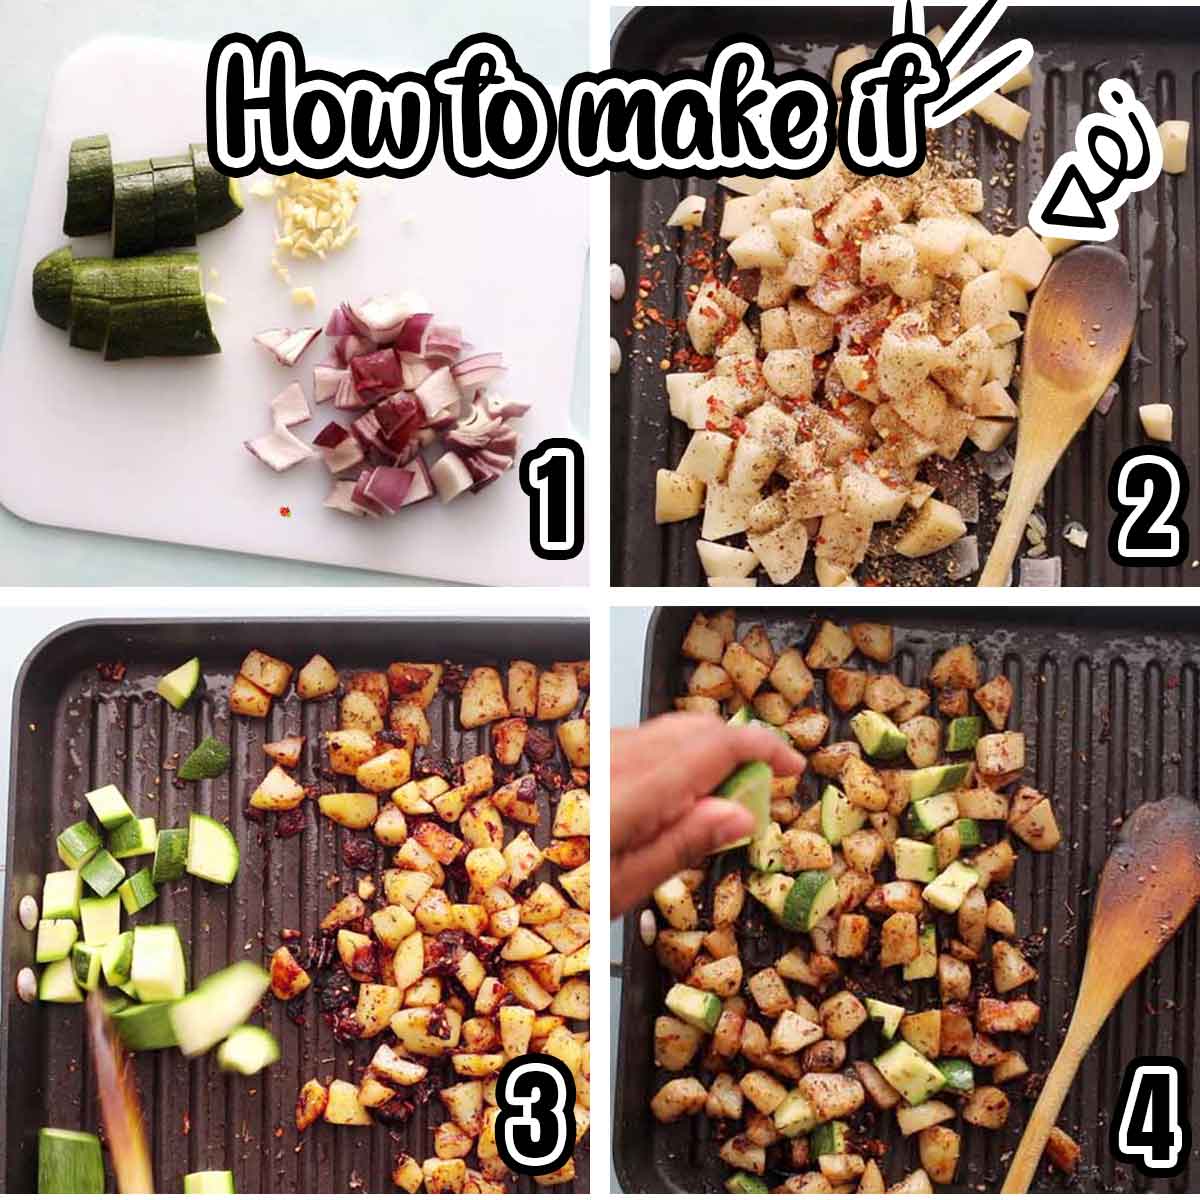 Collage of 4 steps to make the recipe. Each collage has a number corresponding to the step.